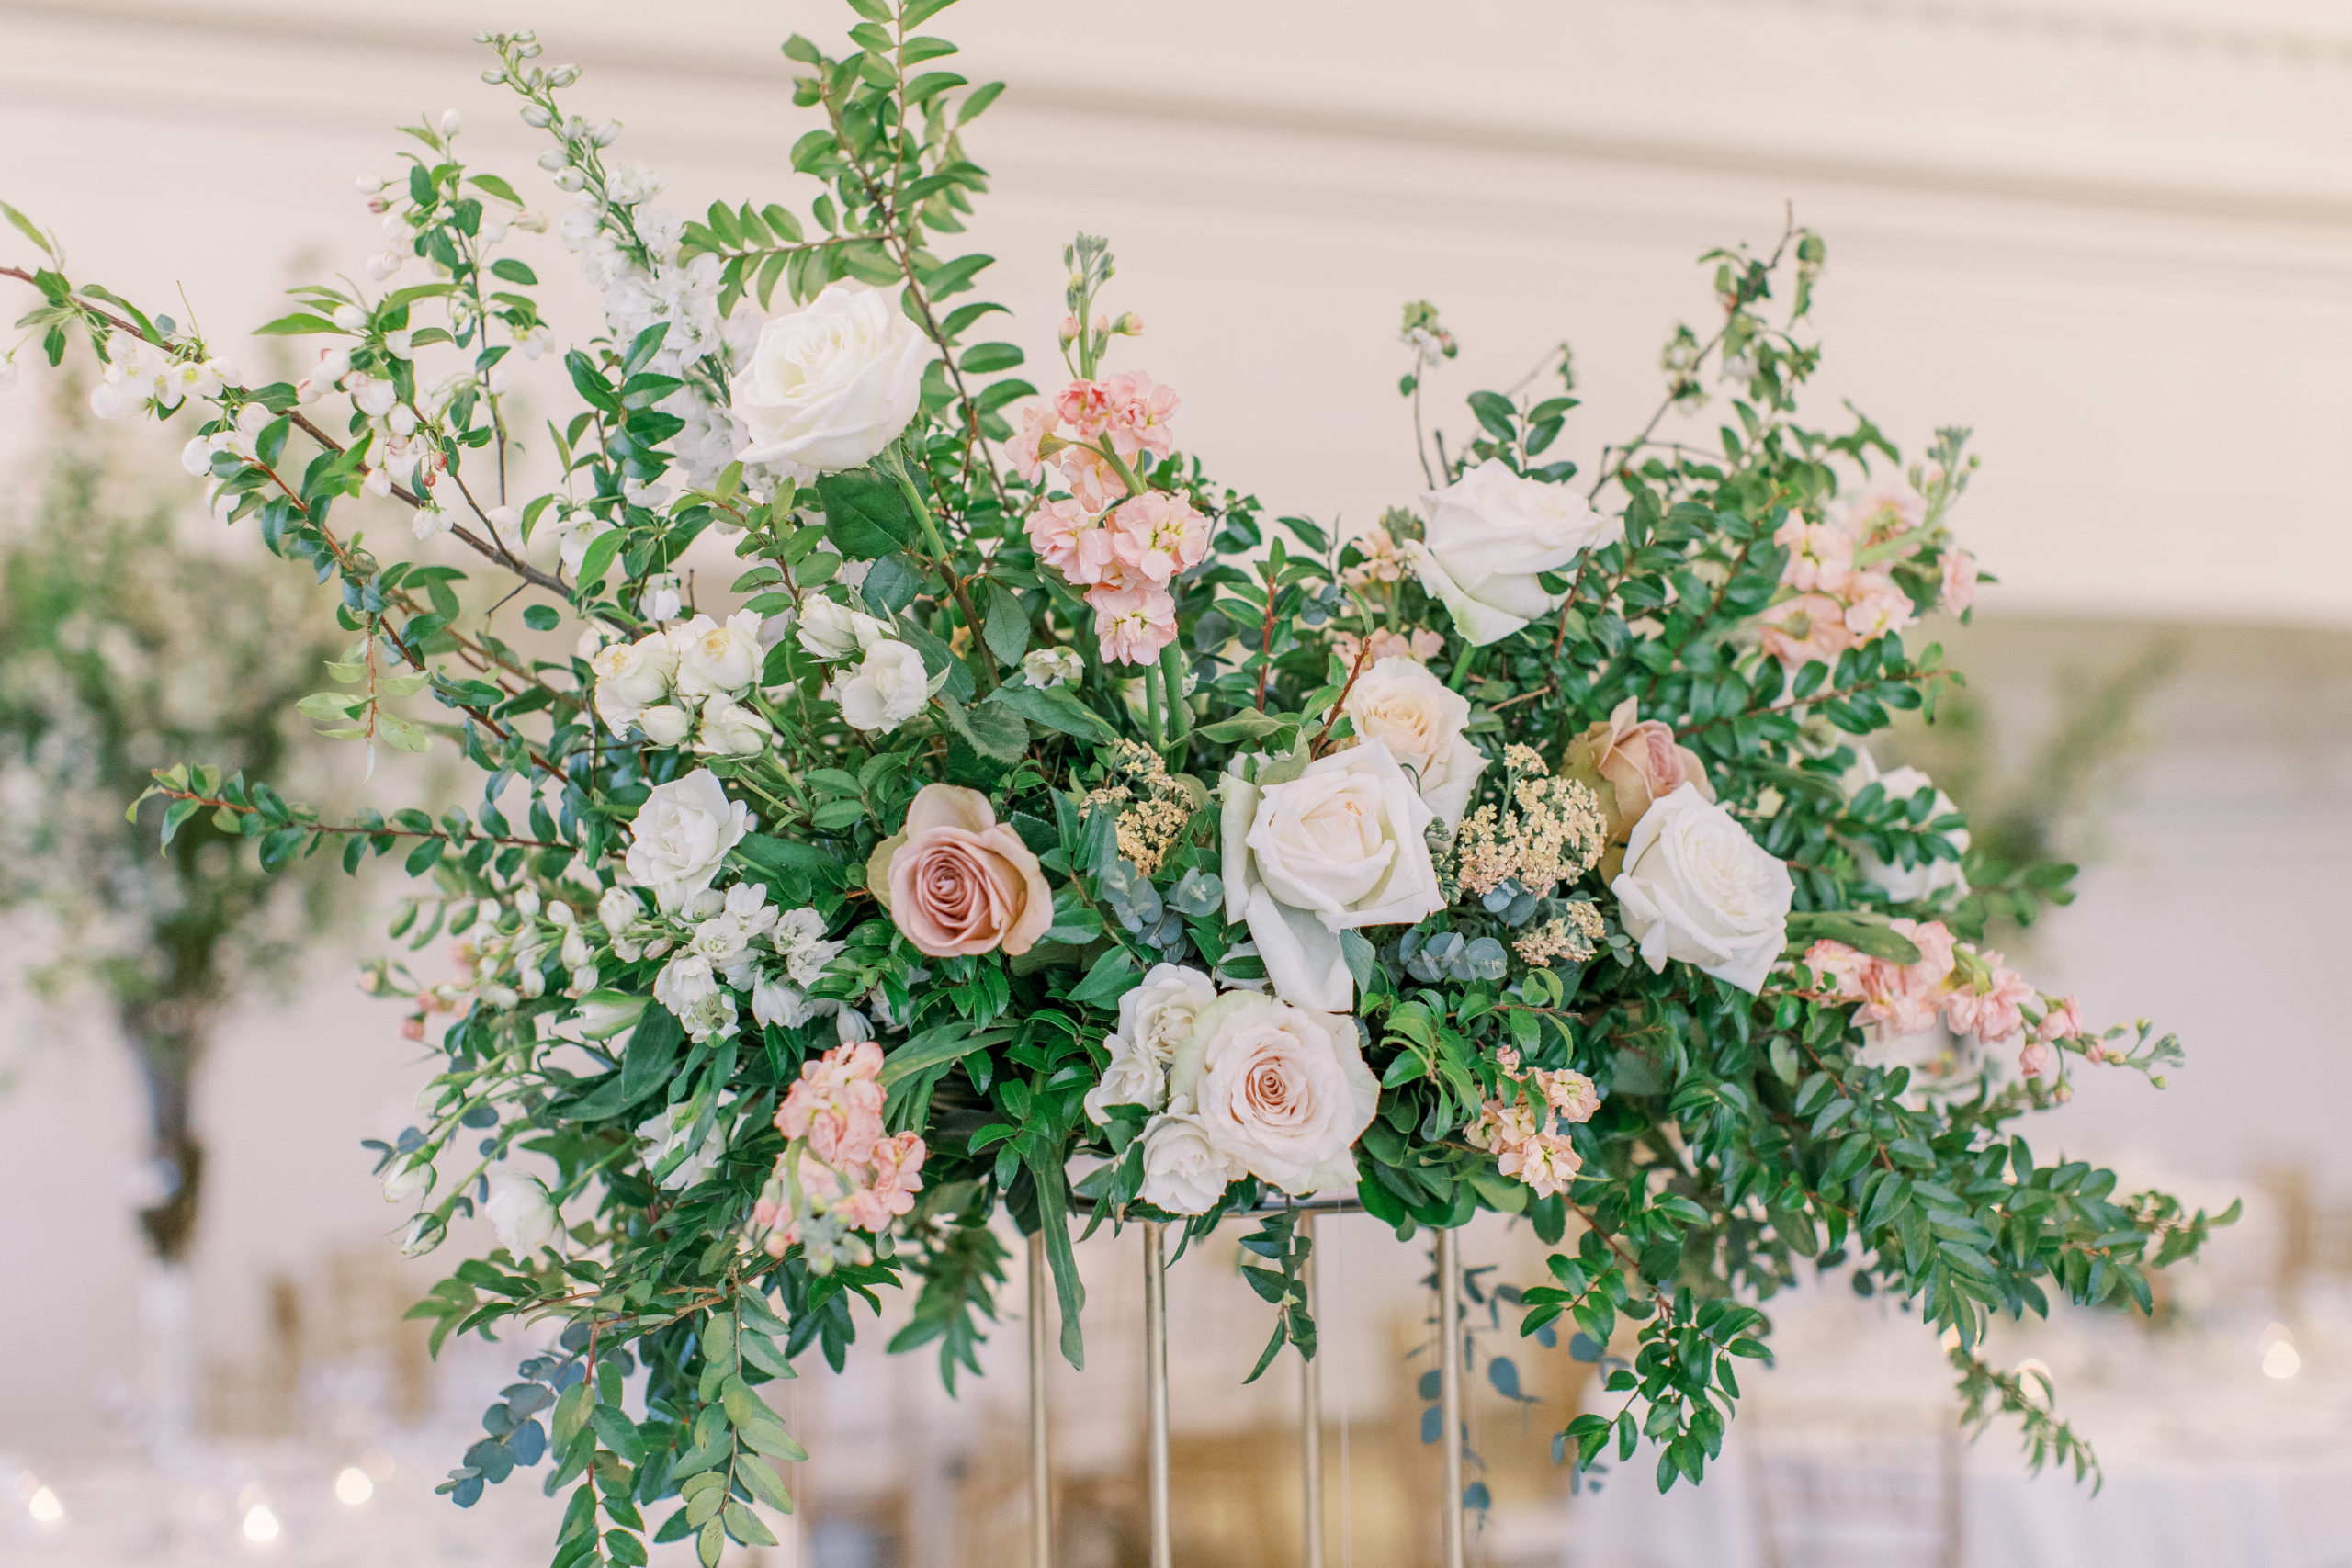 Peach and white rose centerpiece at wedding reception for a Romantic Park Chateau Wedding Photography